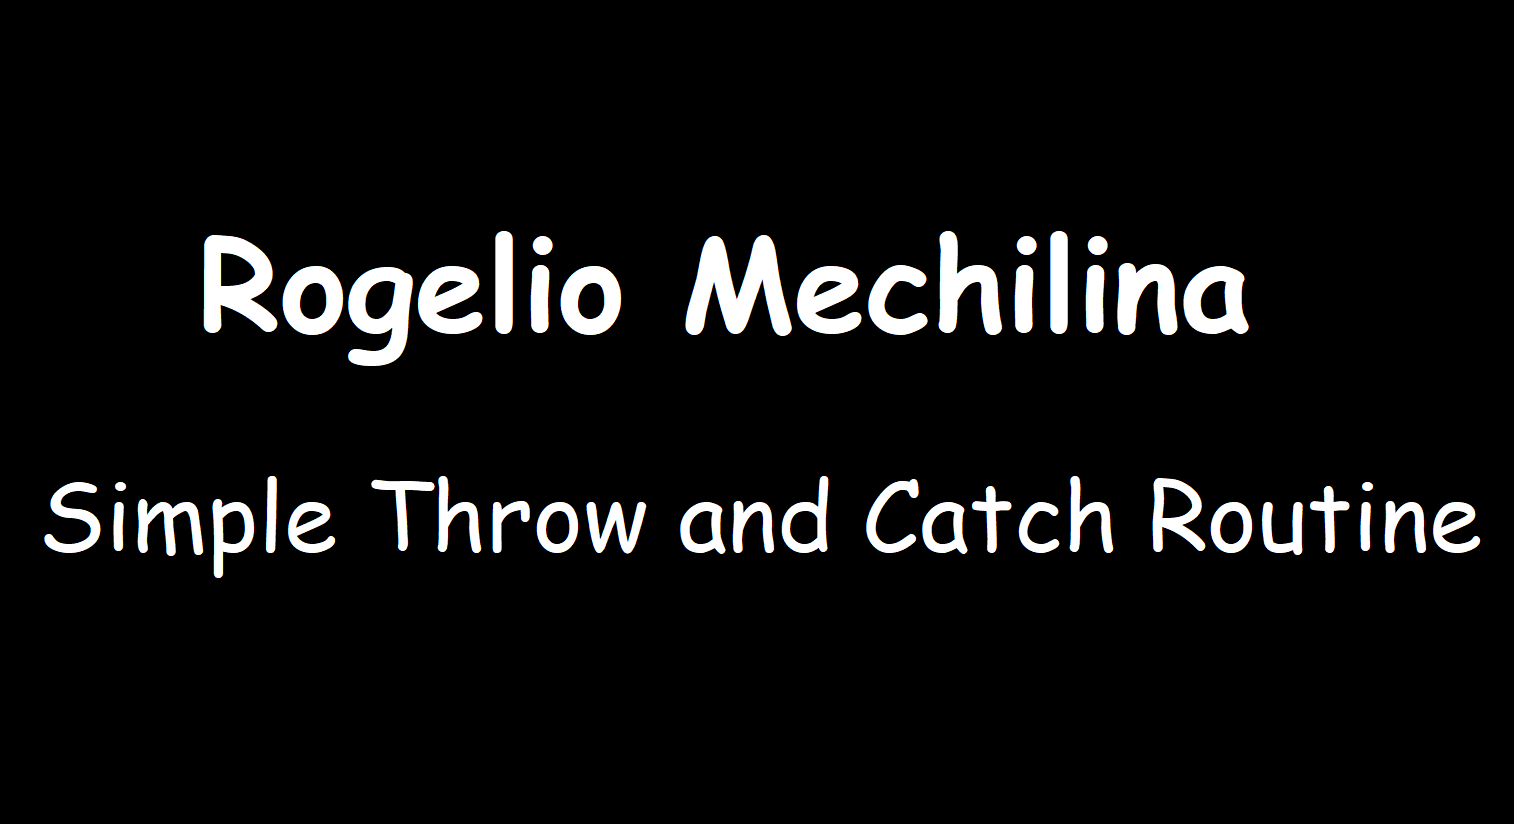 Rogelio Mechilina - Simple Throw and Catch Routine